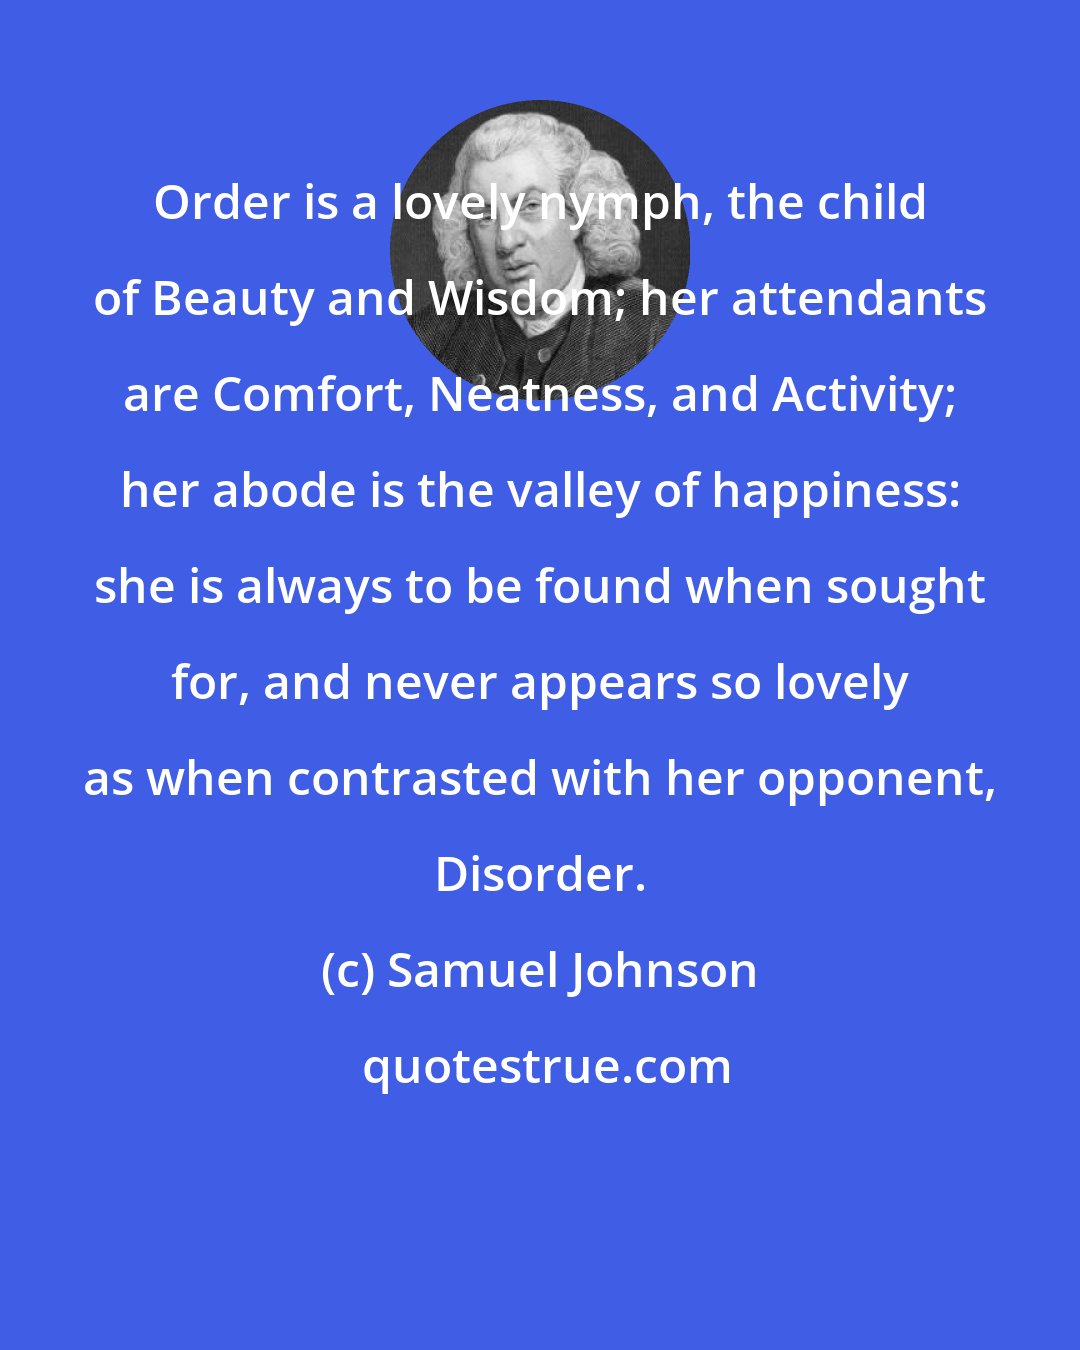 Samuel Johnson: Order is a lovely nymph, the child of Beauty and Wisdom; her attendants are Comfort, Neatness, and Activity; her abode is the valley of happiness: she is always to be found when sought for, and never appears so lovely as when contrasted with her opponent, Disorder.